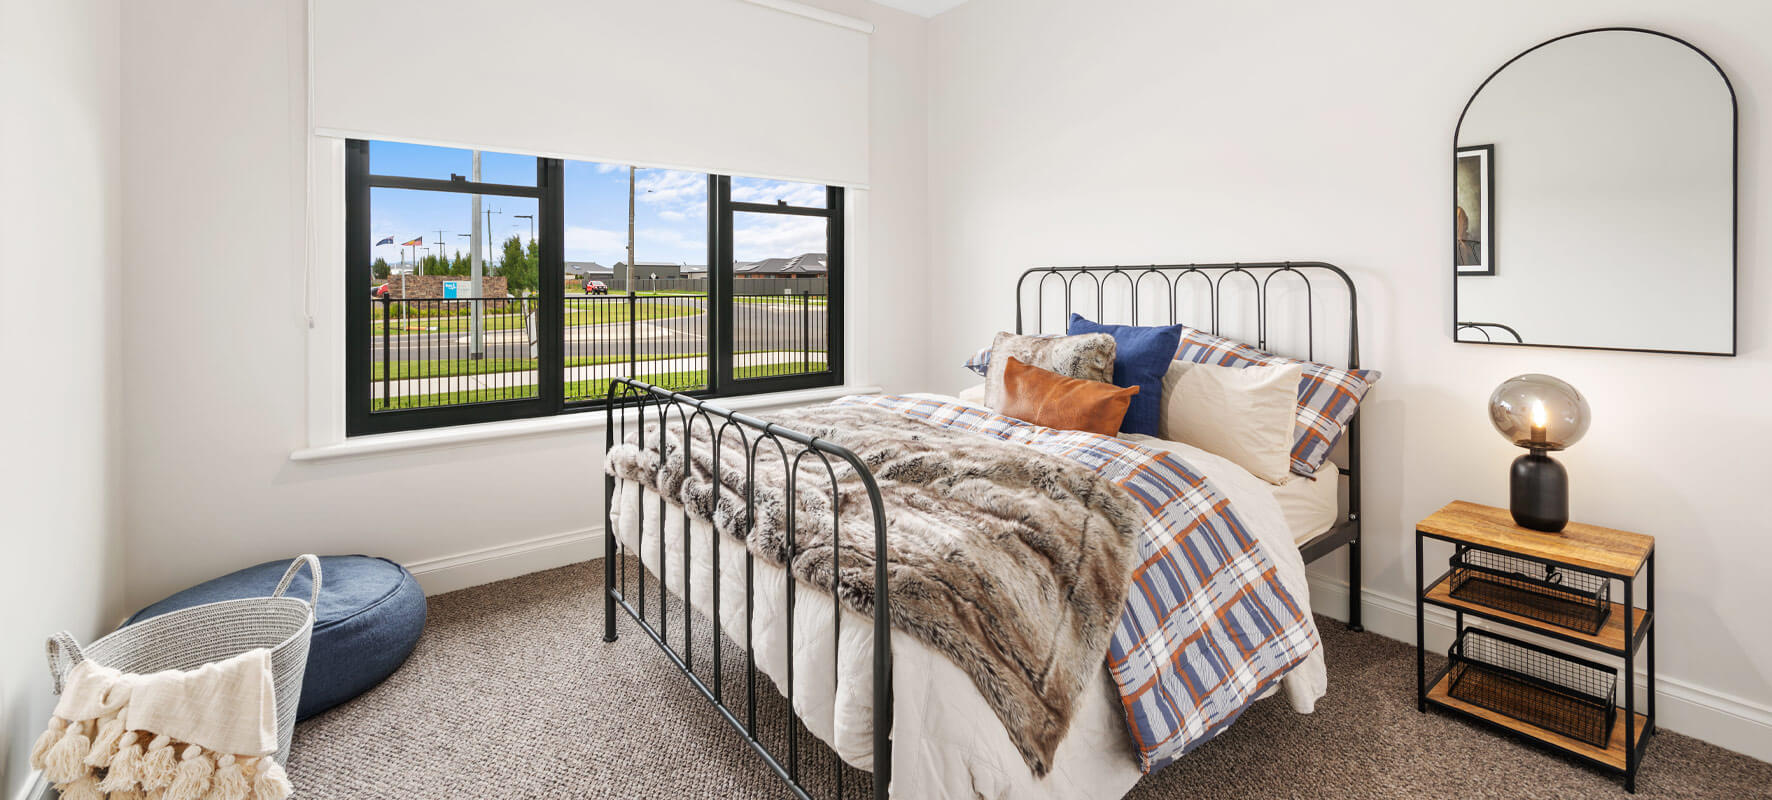 Photo of bedroom in Ranch style home showing black wought iron bed with country style bed linen.